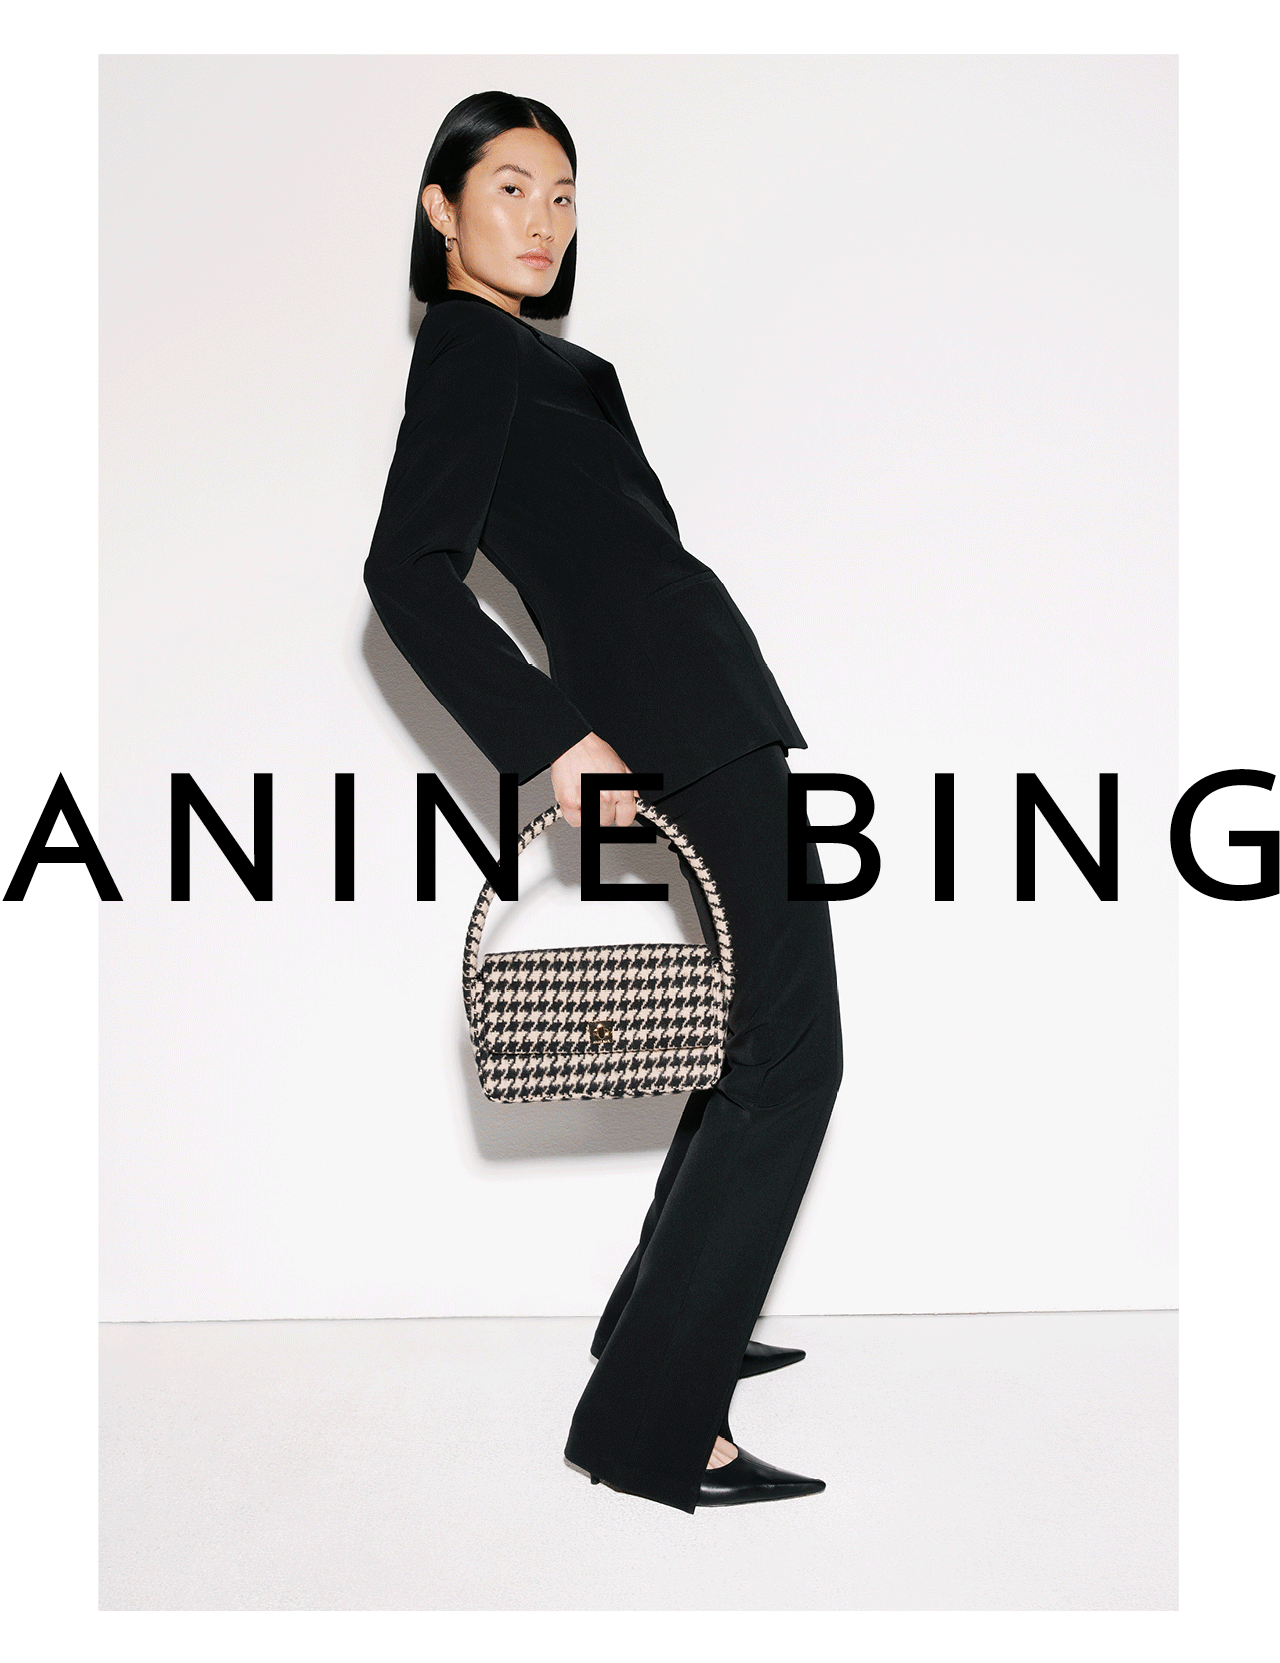 Allow me to show off my new favorite bag. The new @aninebingofficial Nico  Bag 😍 #ANINEBINGMuse @aninebing #ad